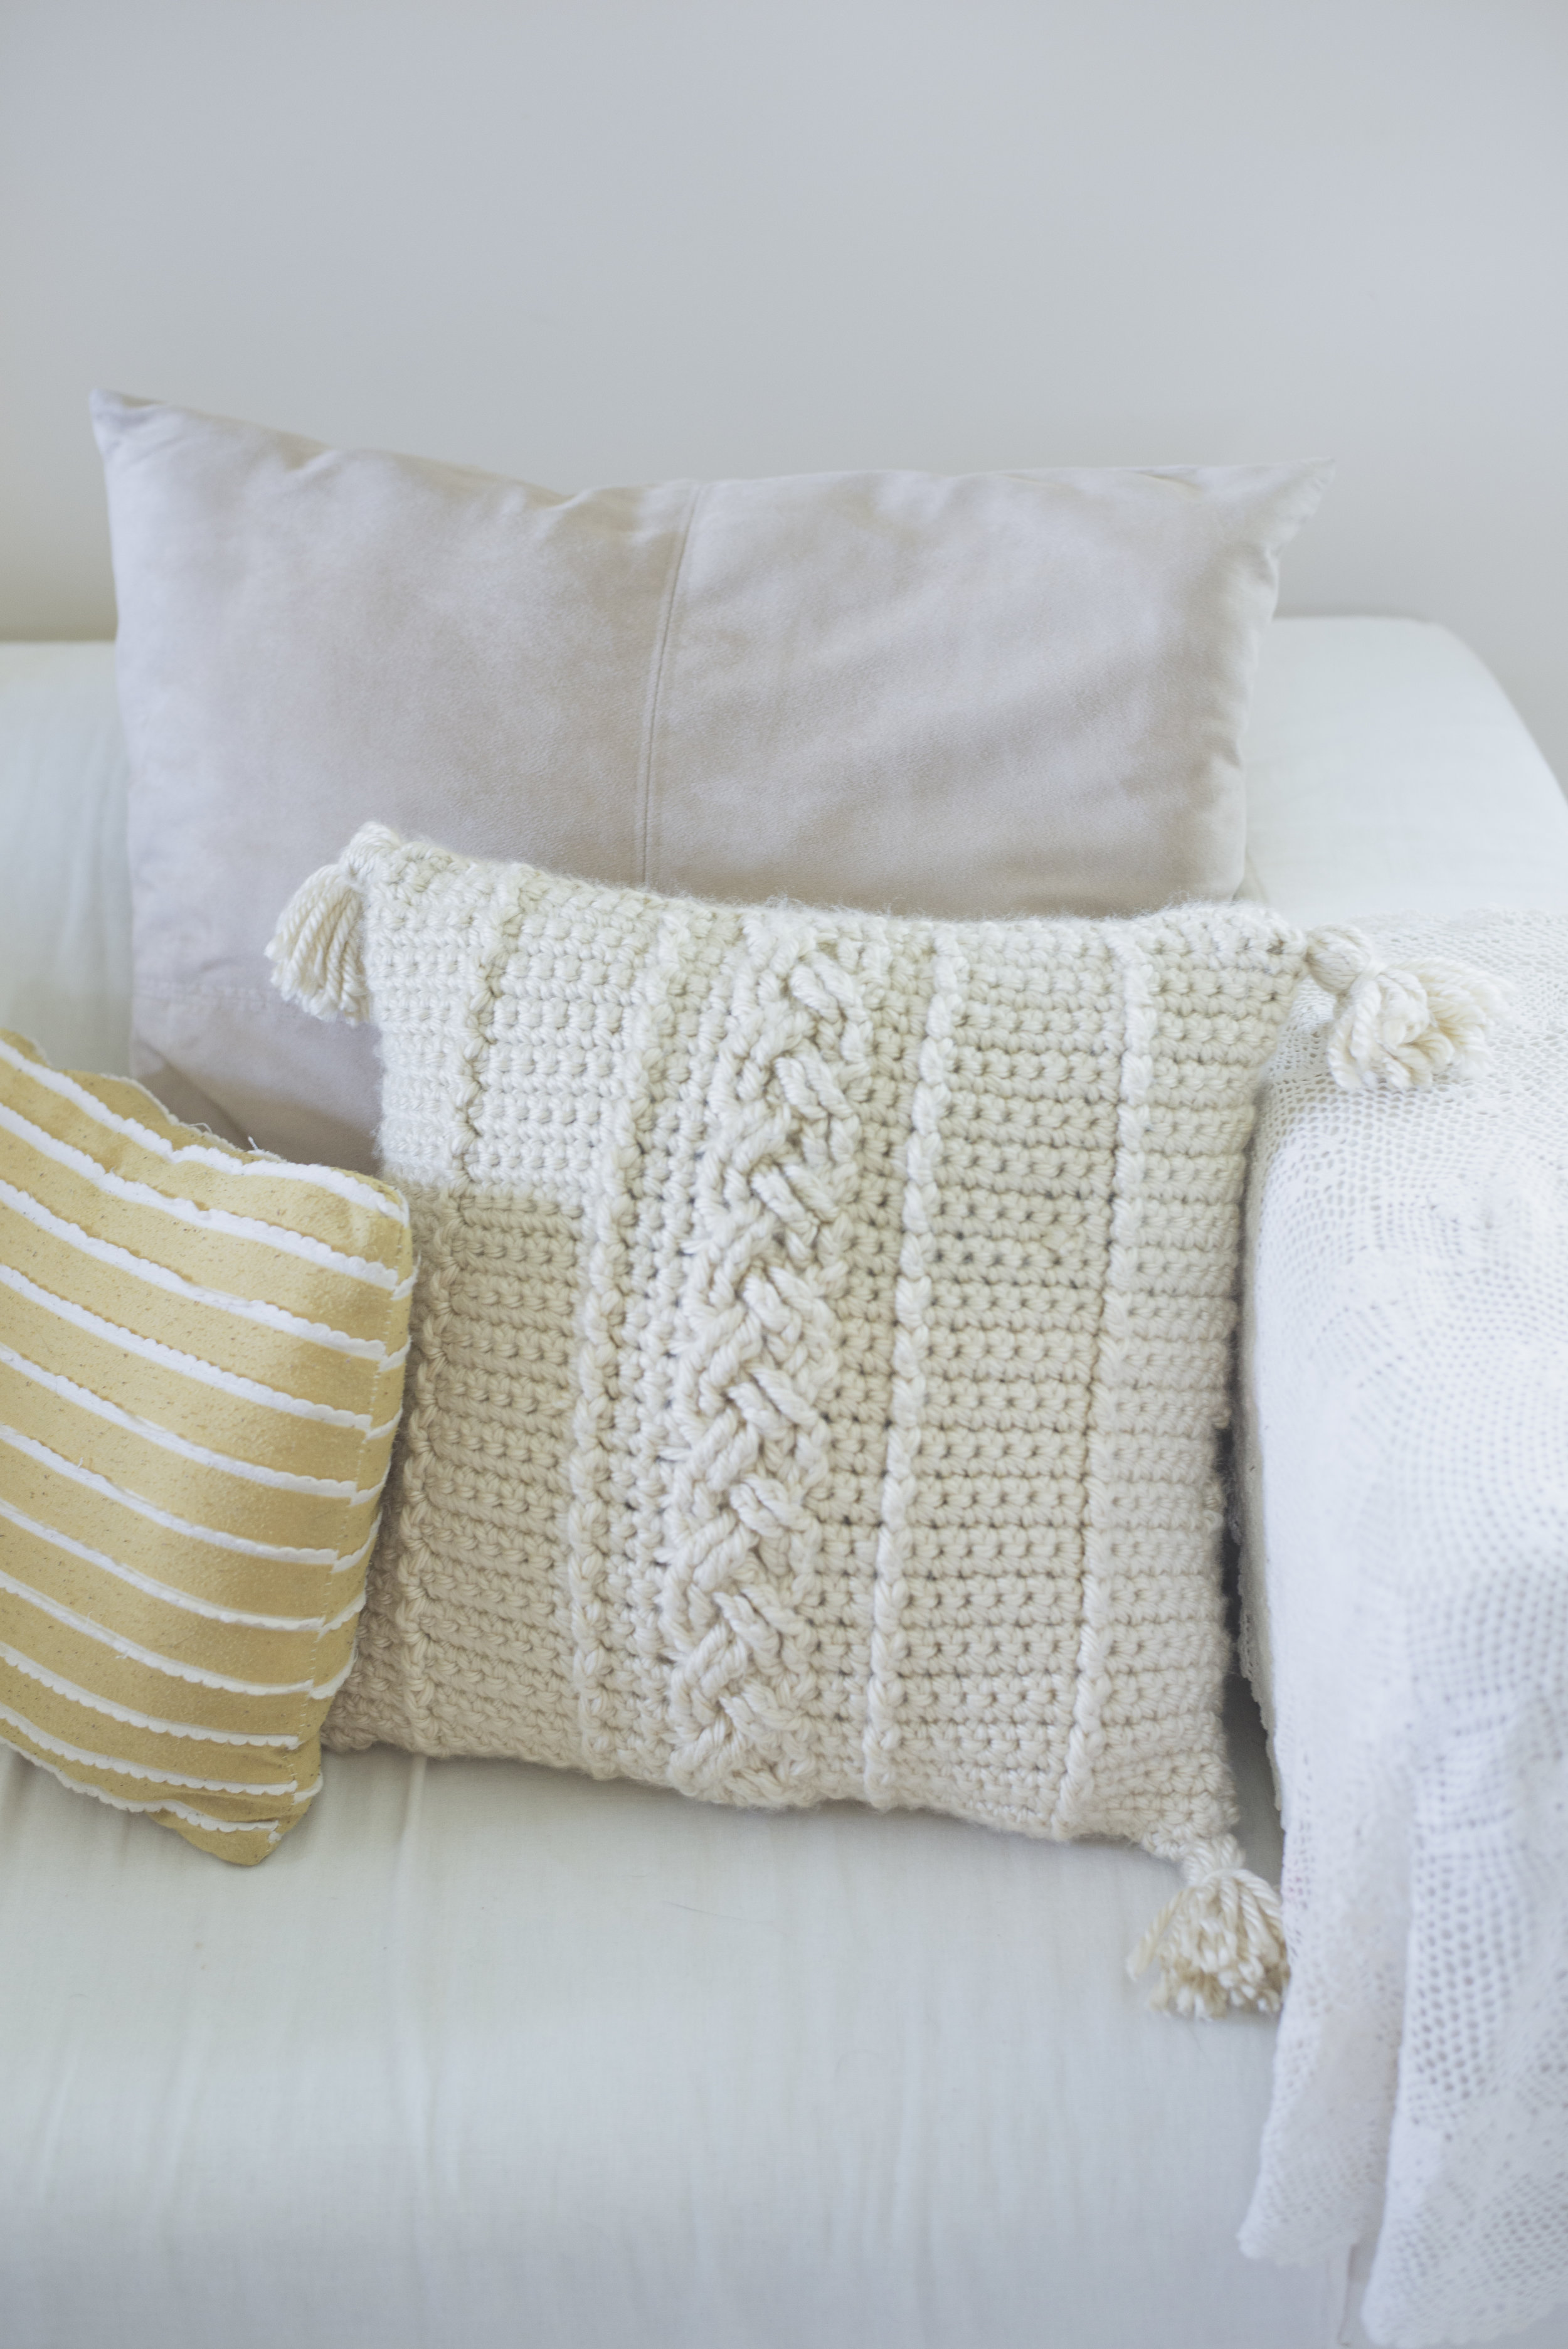 Sweater Knit Pillow  Toss Pillow With VIntage Lace and Buttons  Farmhouse Decor